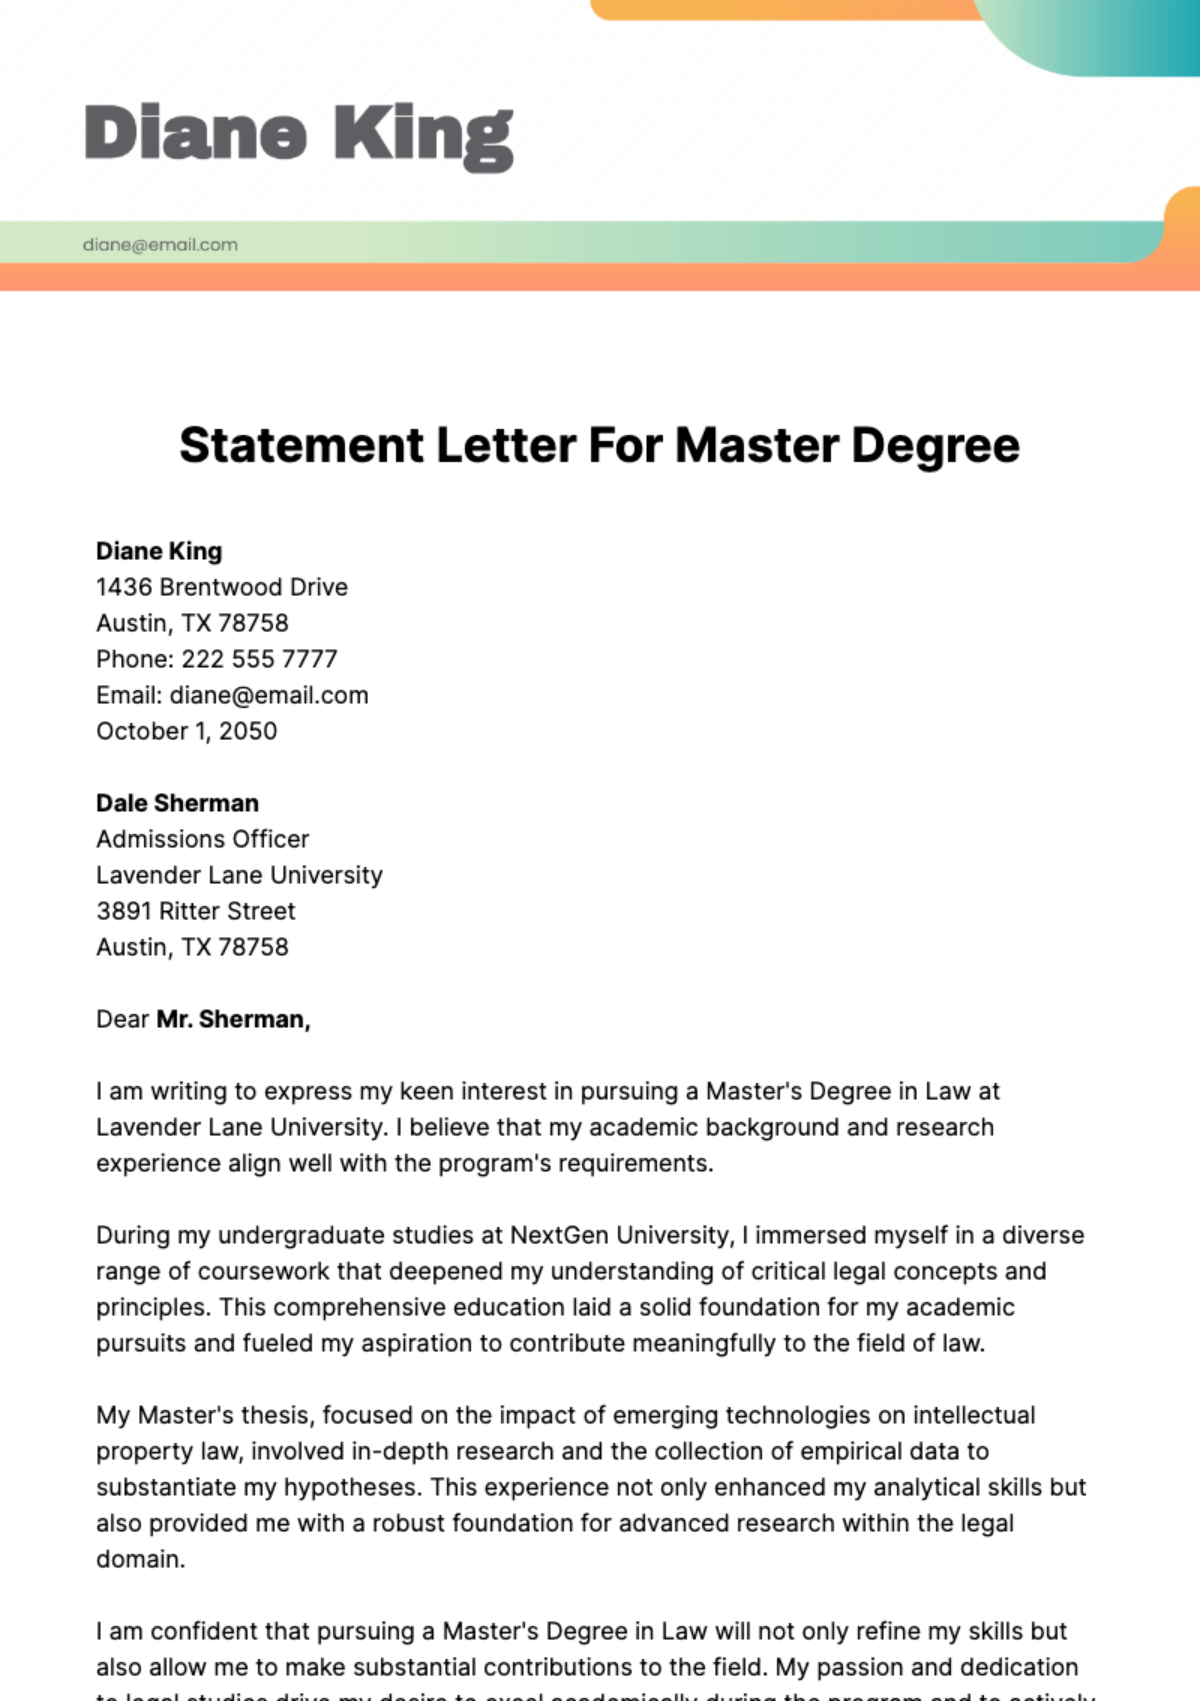 Statement Letter for Master Degree Template